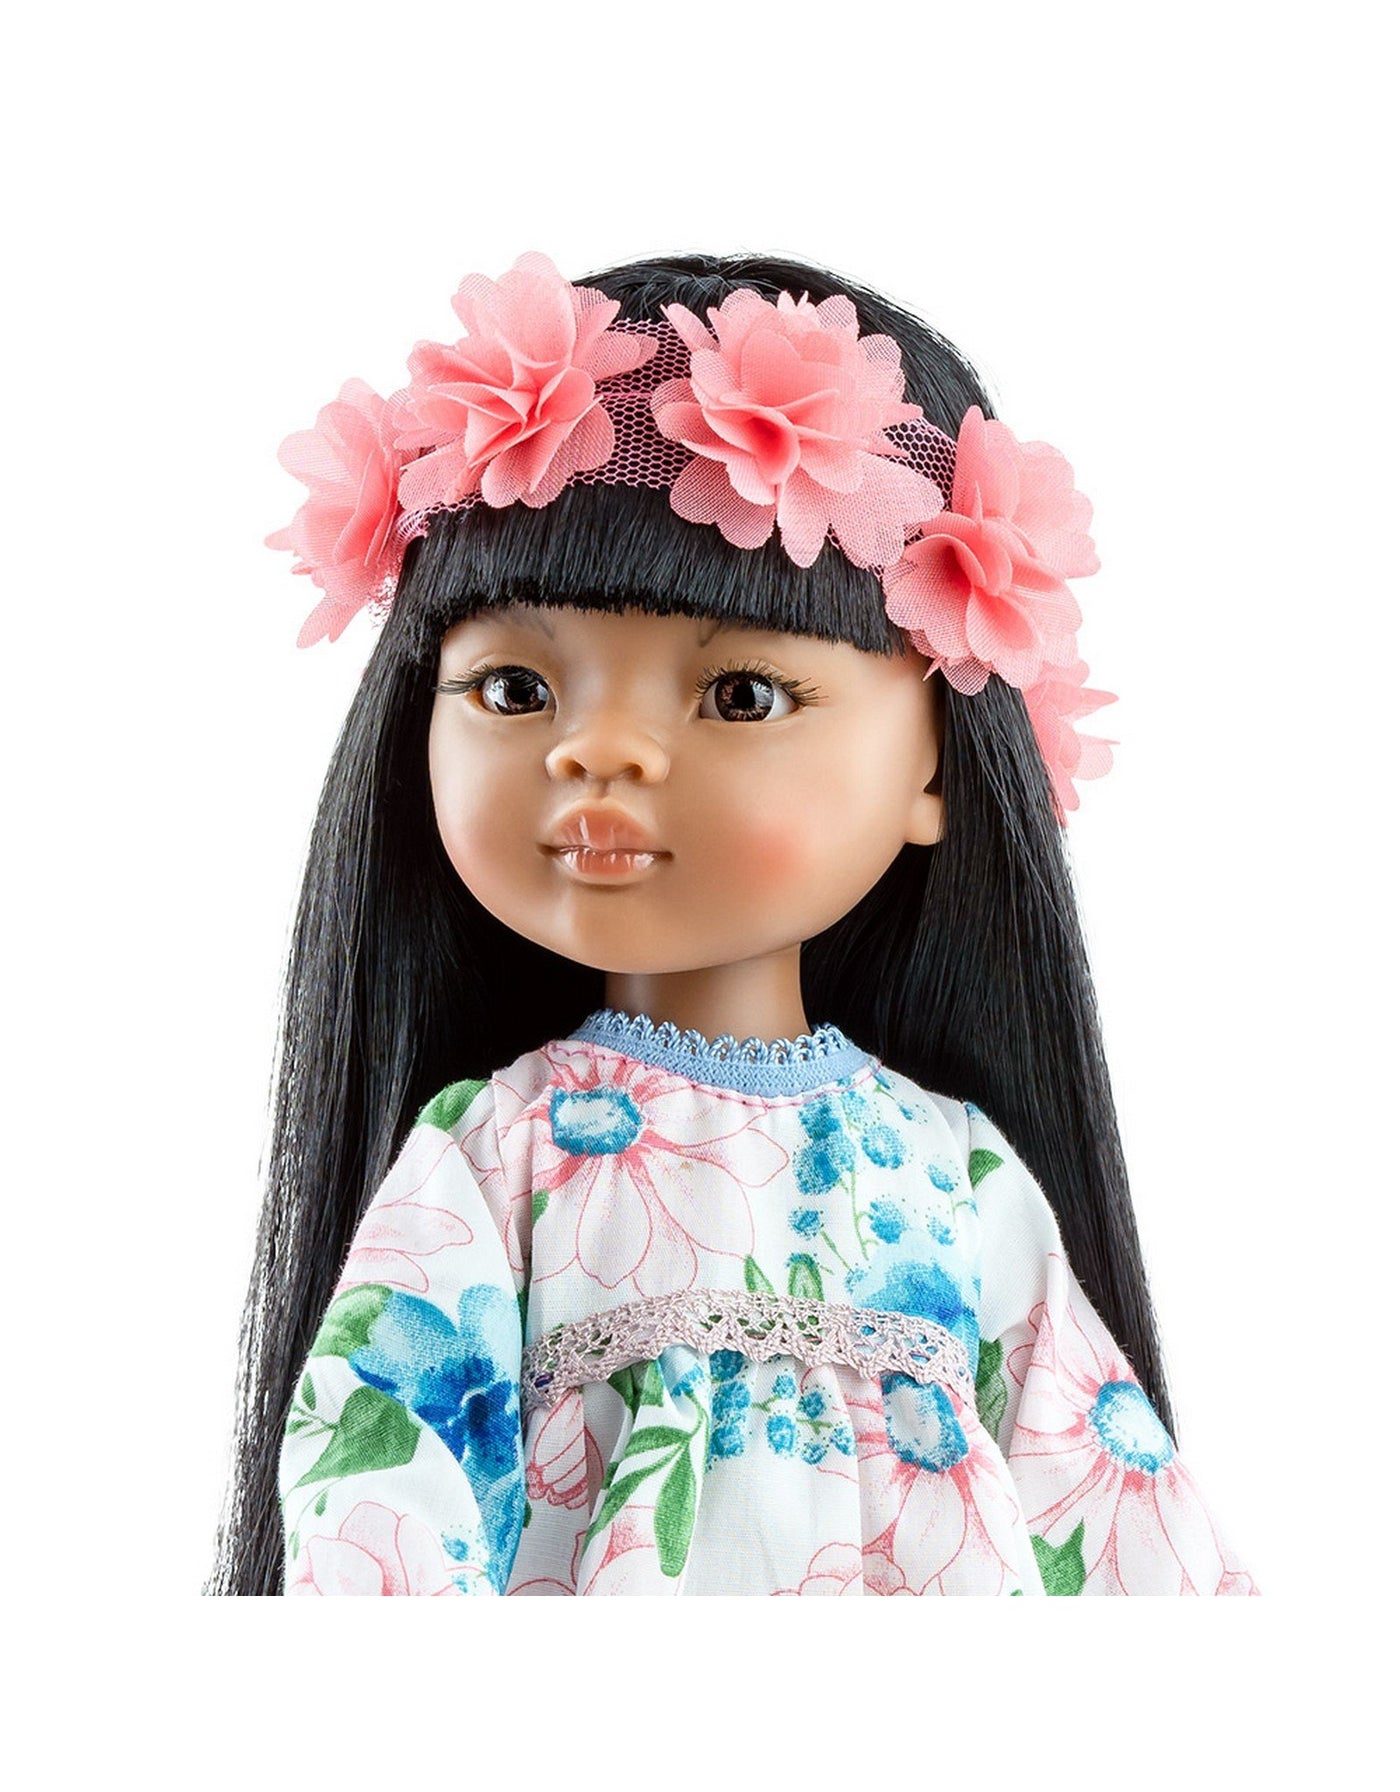 Las Amigas Doll - Meily with white dress with blue flowers and a flower crown - Paola Reina